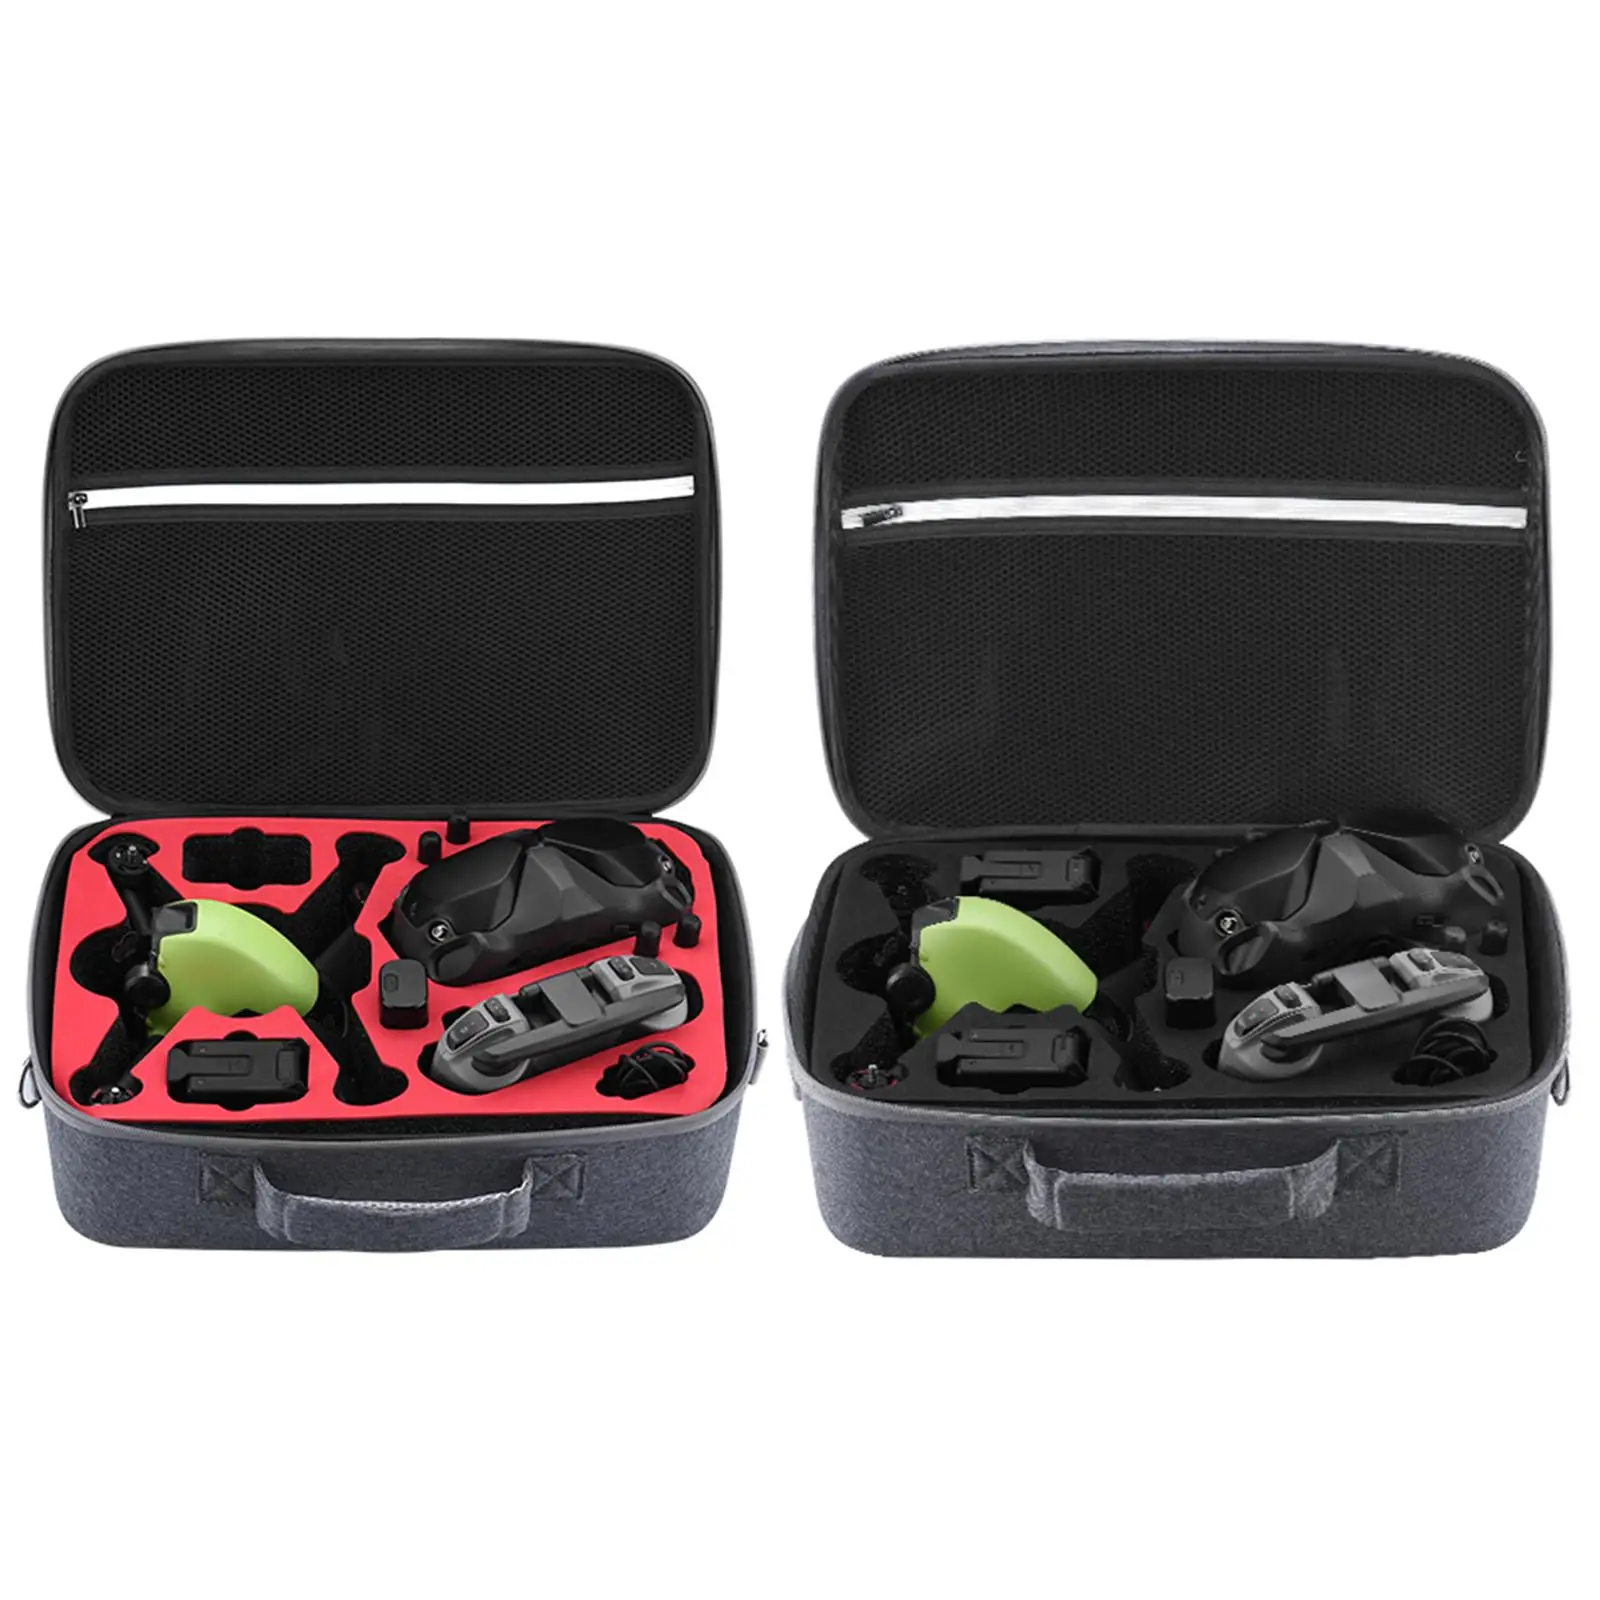 Portable Drone Storage Carrying Case for DJI FPV Shockproof Handbag Outdoor